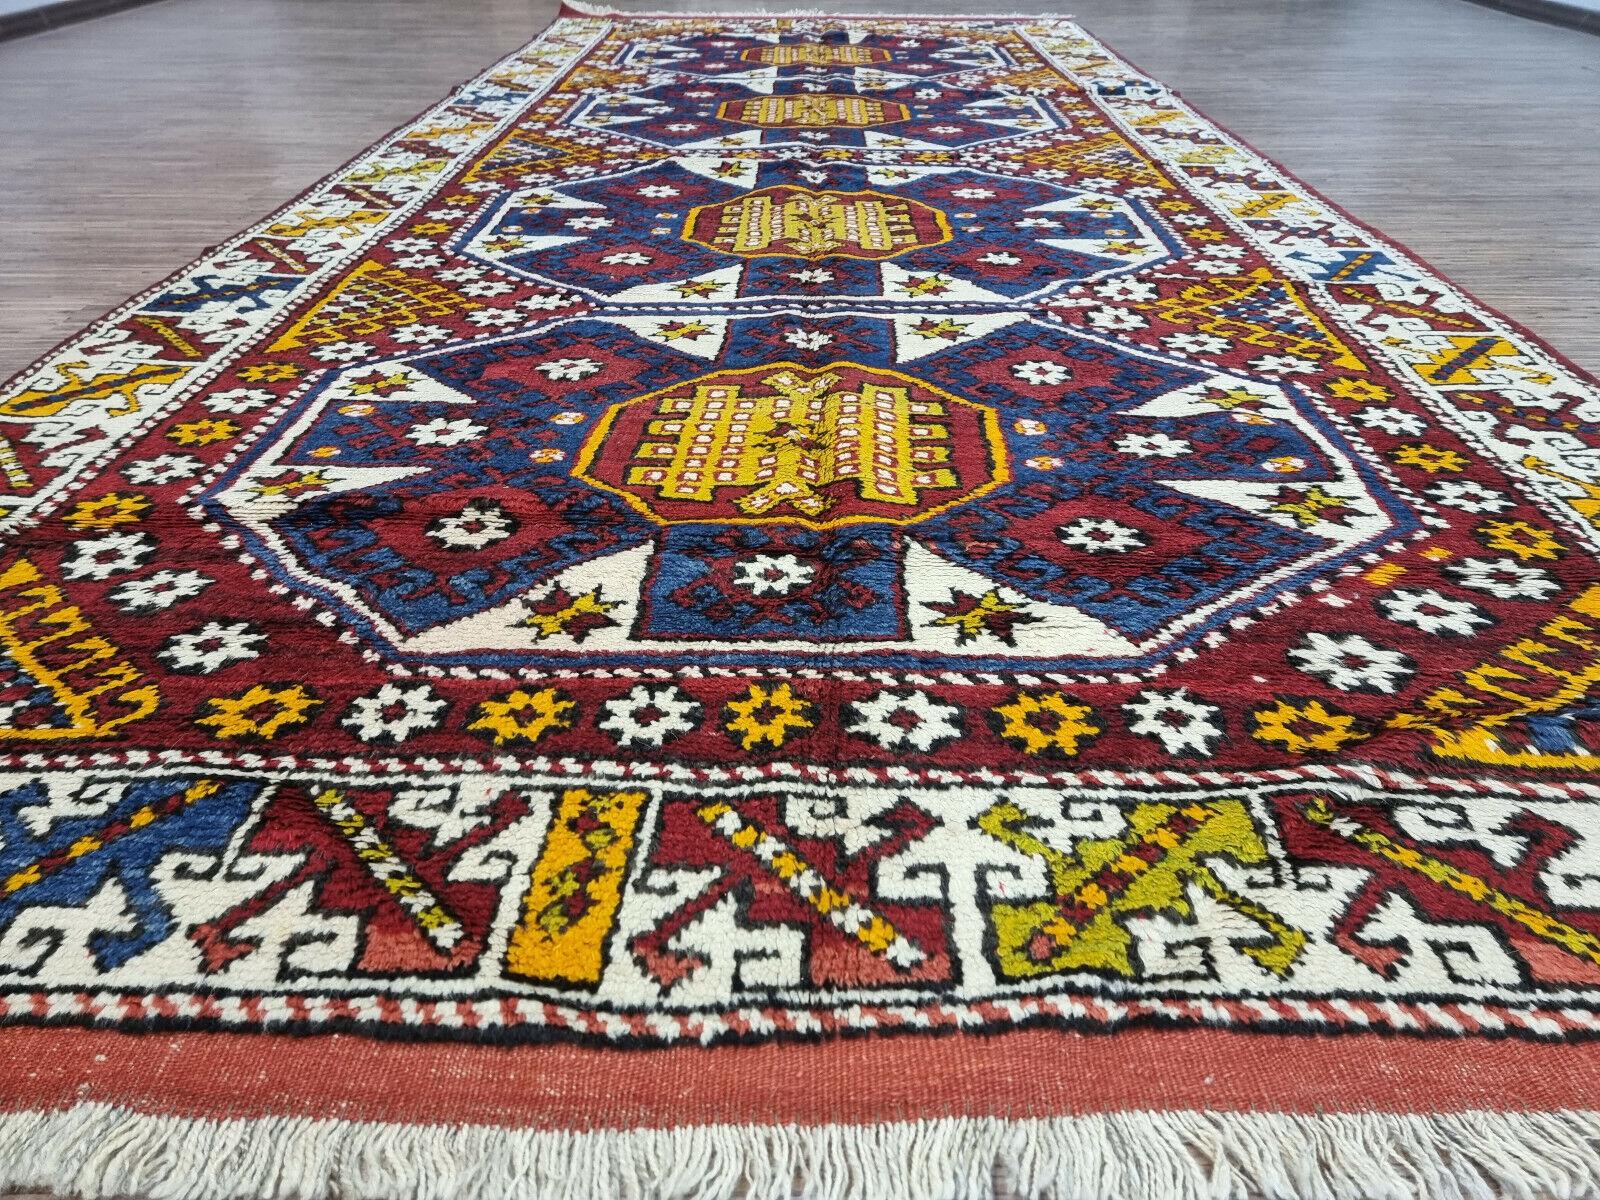 Handmade Antique Turkish Anatolian Runner Rug 5.1' x 12', 1930s - 1D56 In Good Condition For Sale In Bordeaux, FR